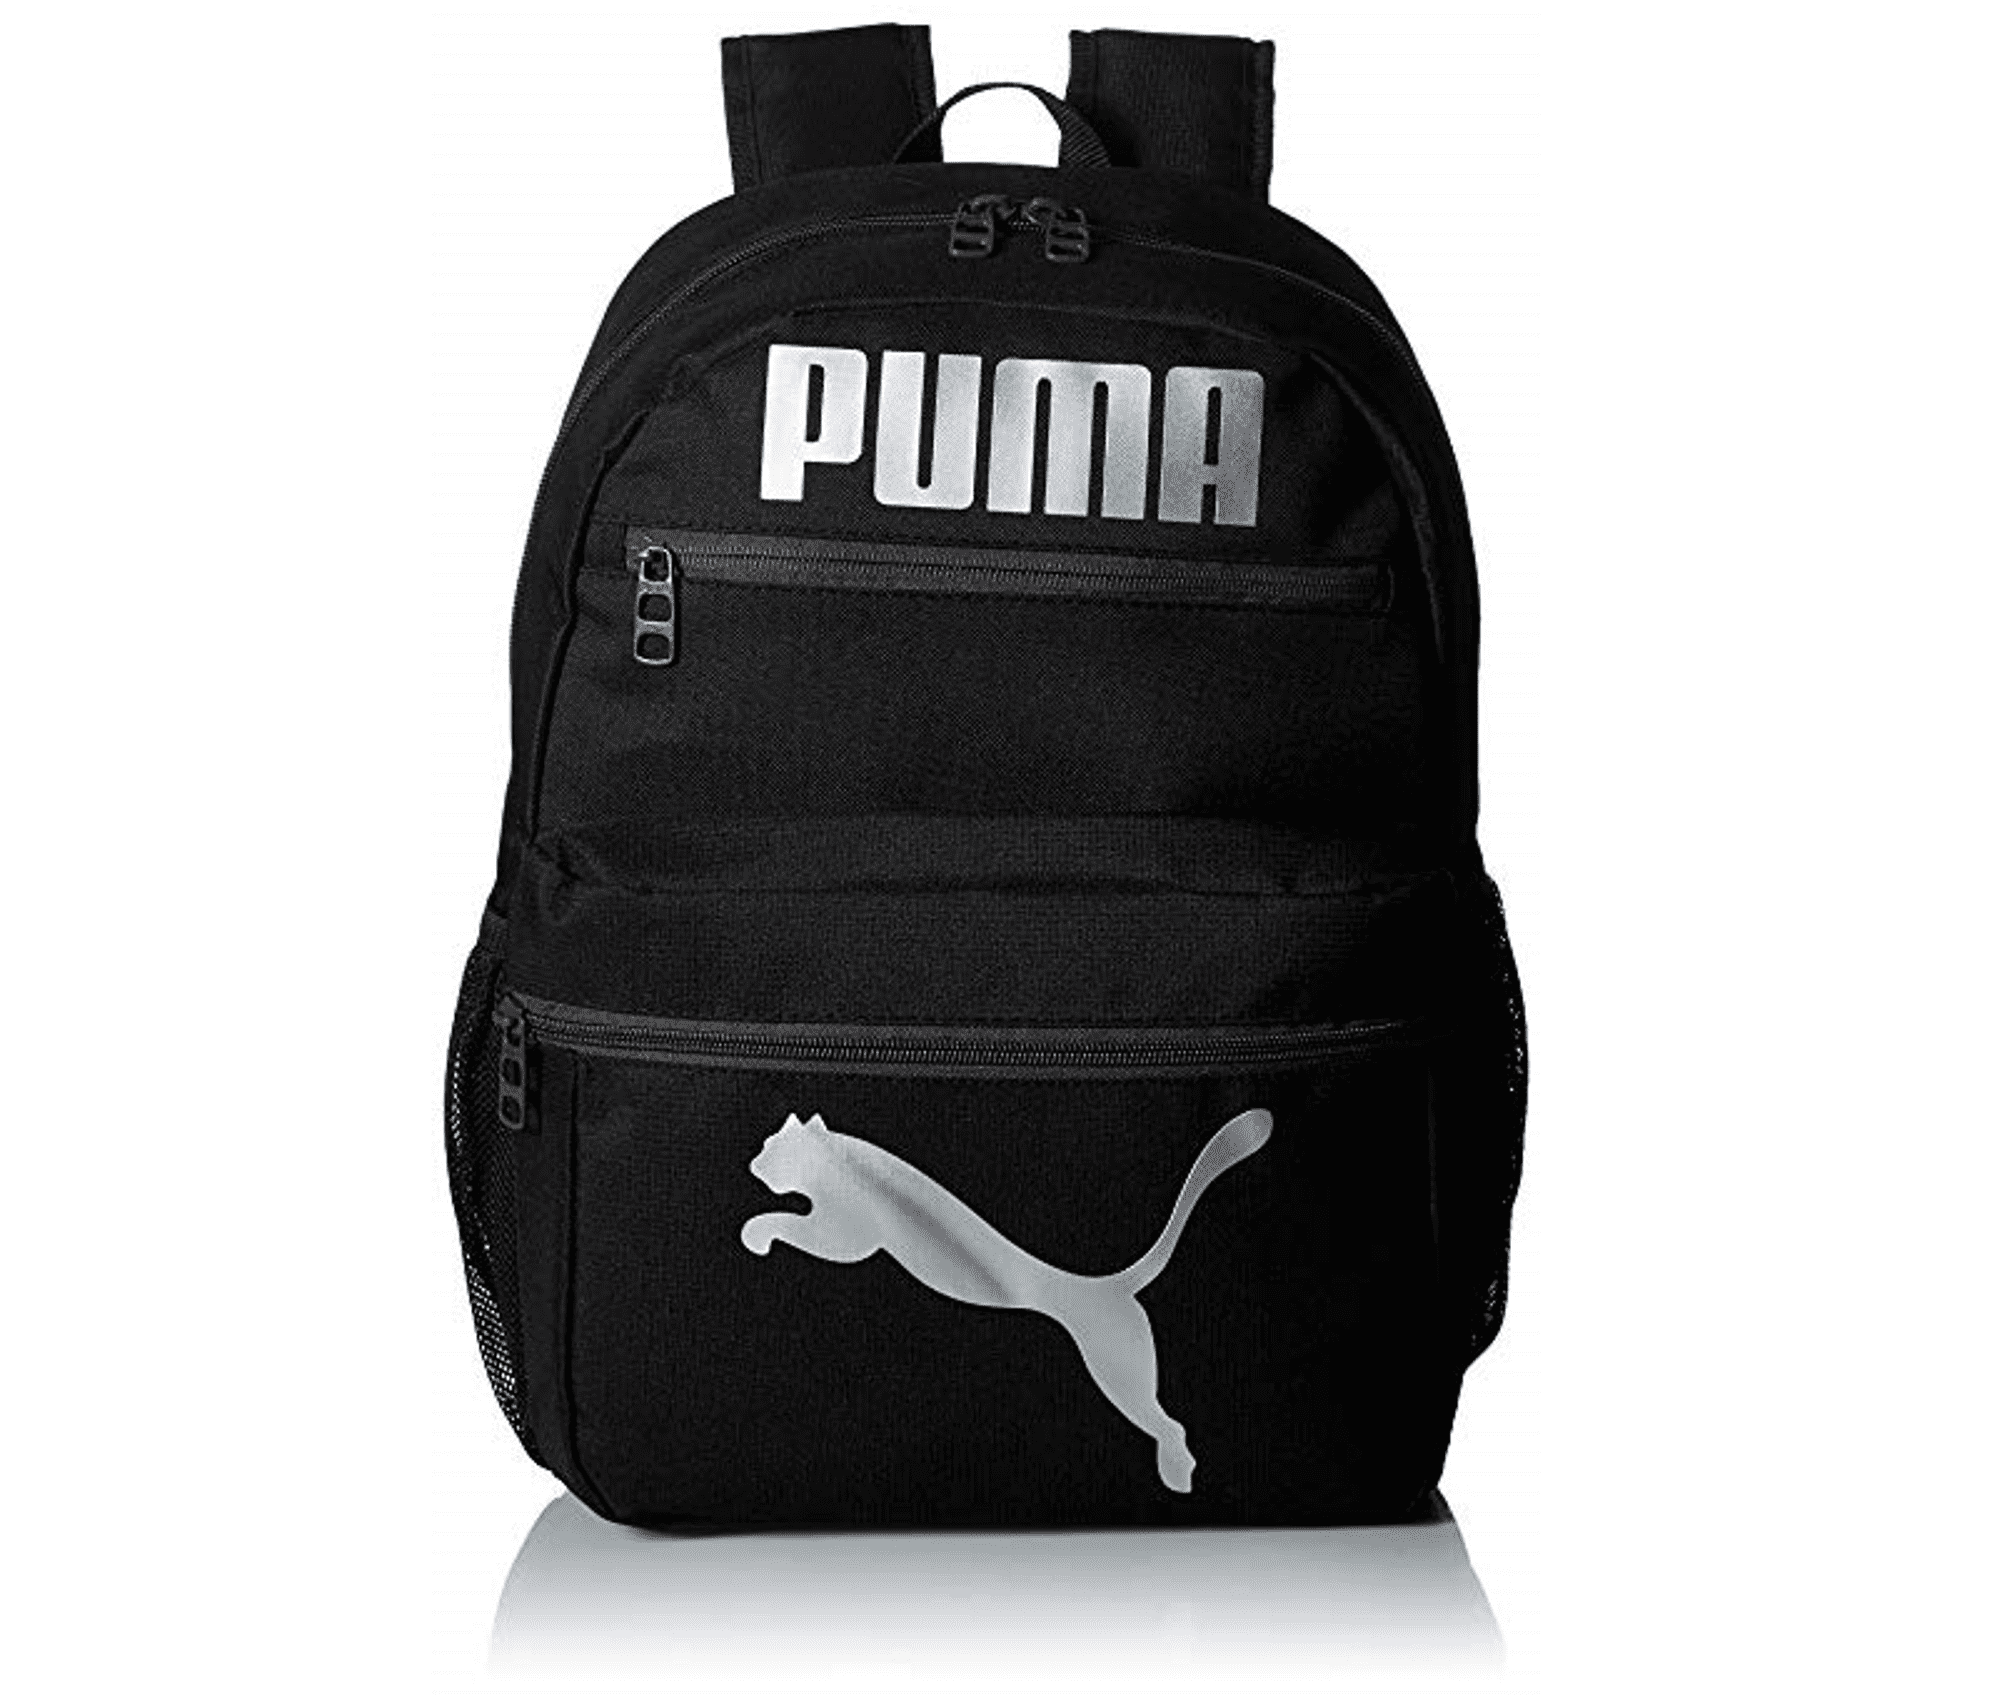 PBH P039 Small Puma Unisex Backpack For Kids 12*10*5 Inches